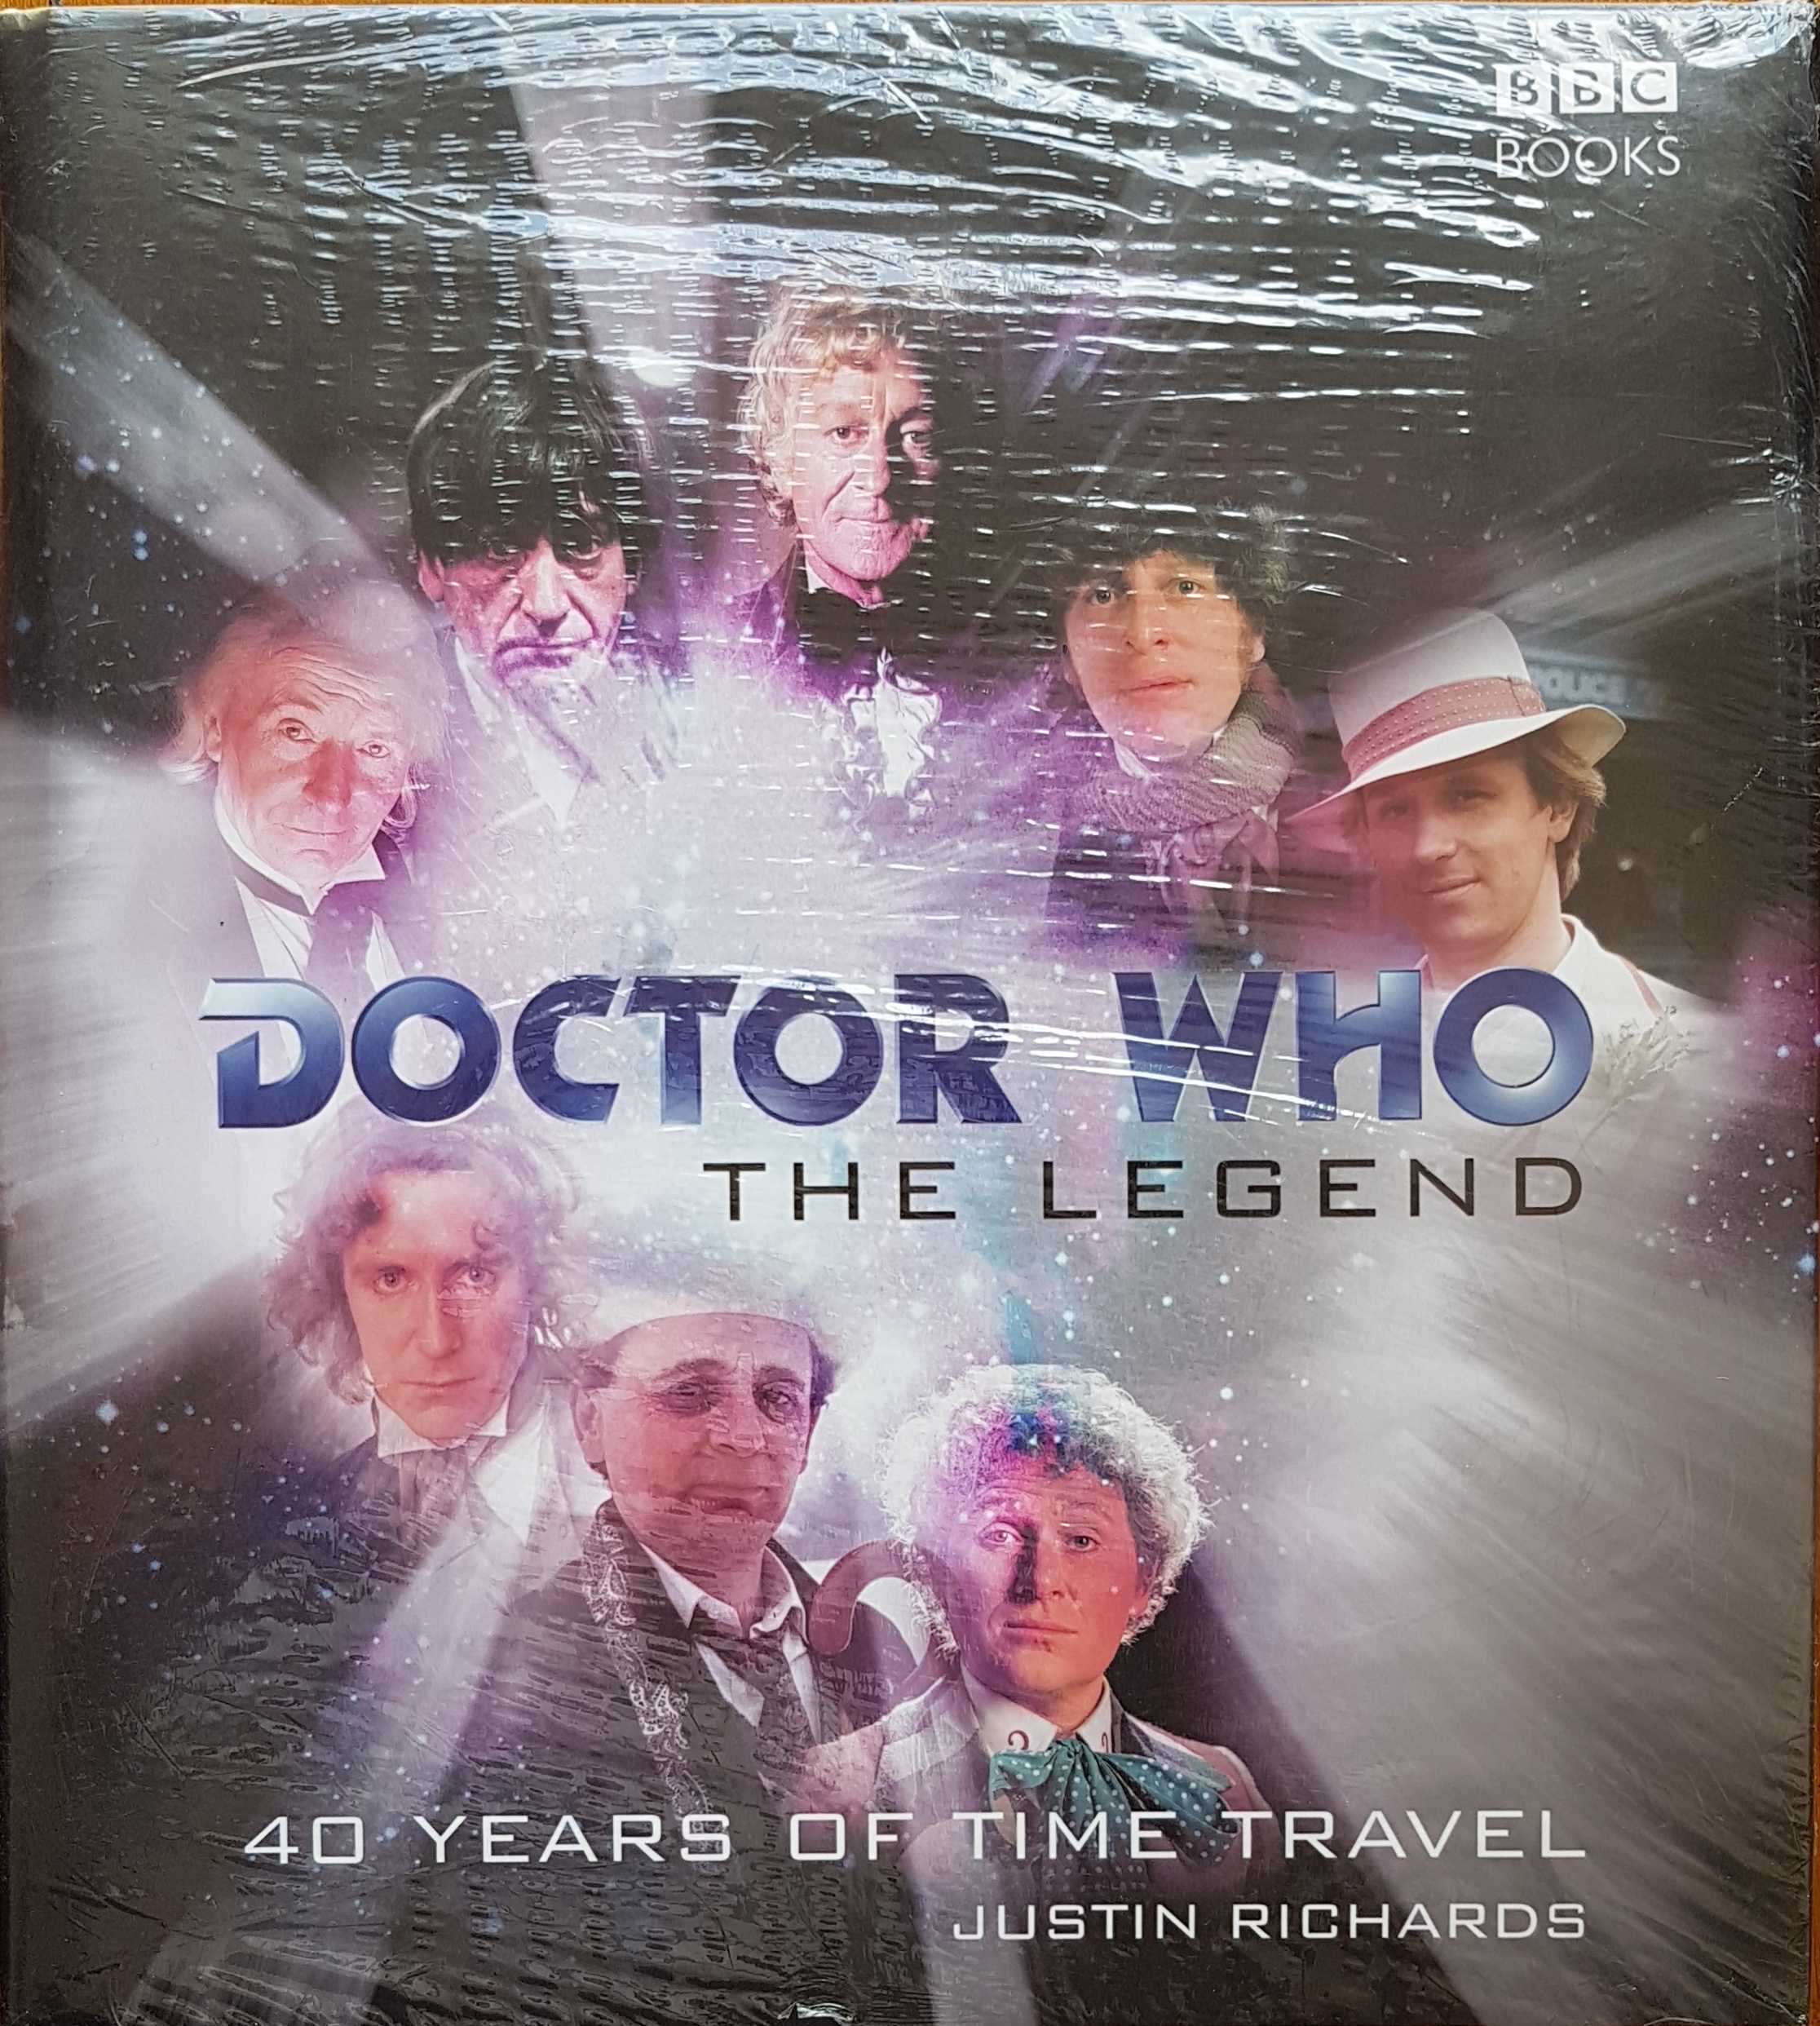 Picture of 0-563-48602-3 Doctor Who - The legend by artist Justin Richards from the BBC records and Tapes library